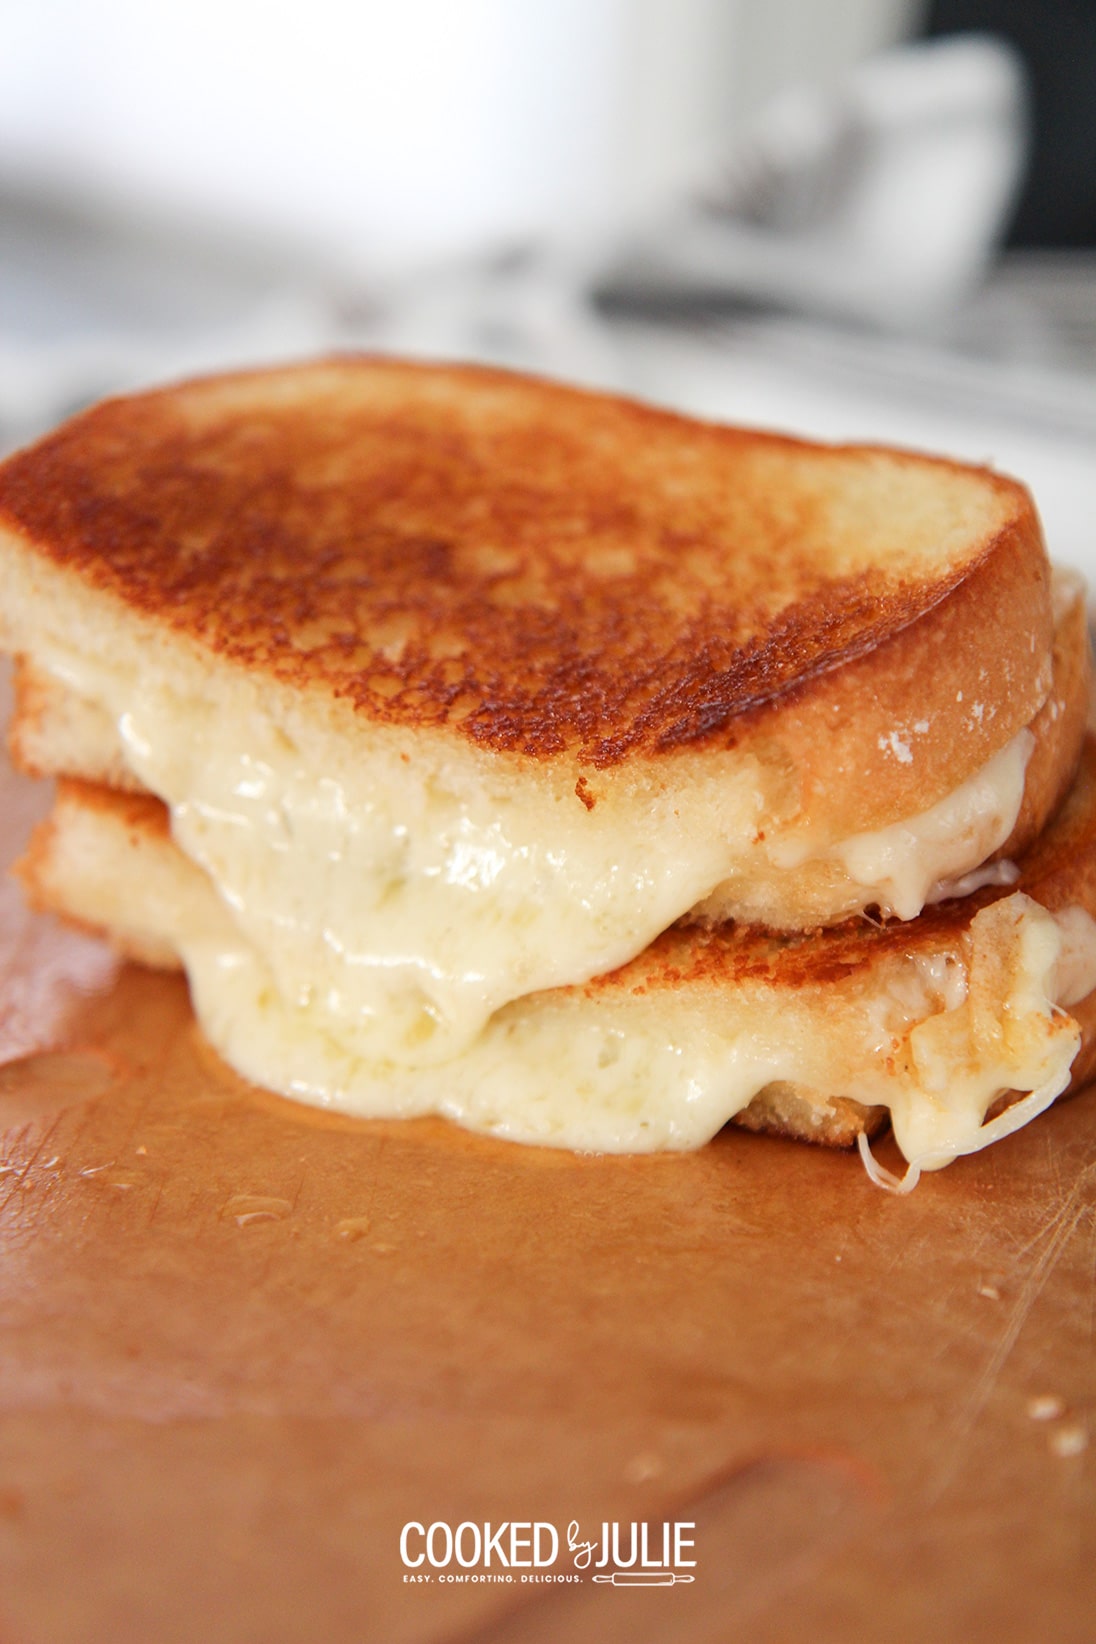 https://www.cookedbyjulie.com/wp-content/uploads/2019/11/grilled-cheese-one.jpg